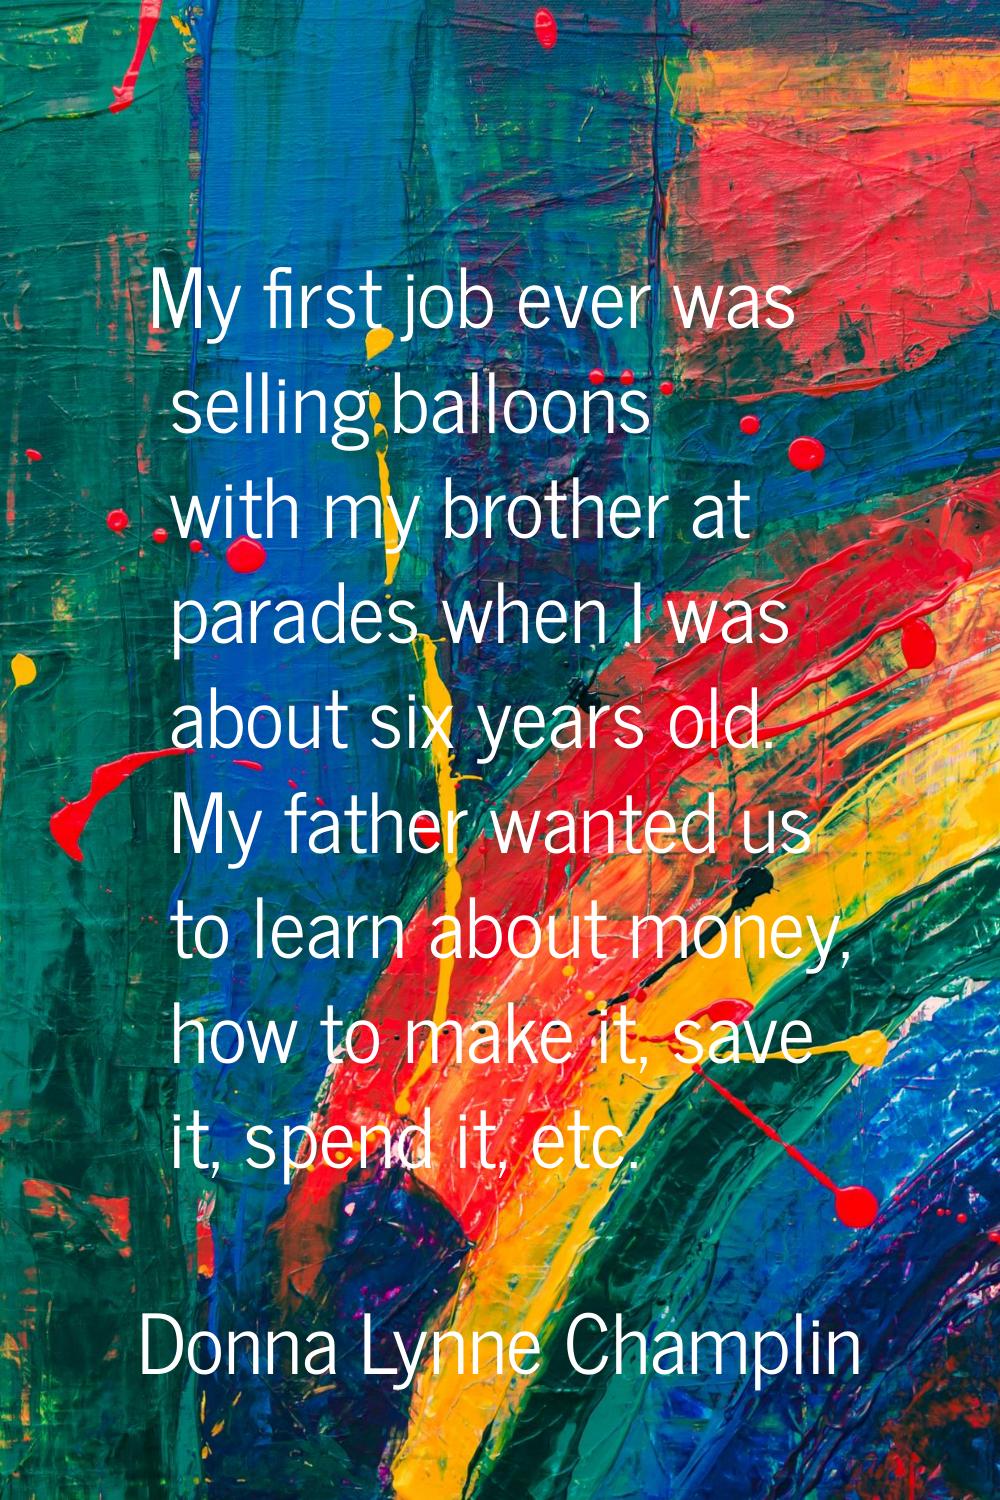 My first job ever was selling balloons with my brother at parades when I was about six years old. M